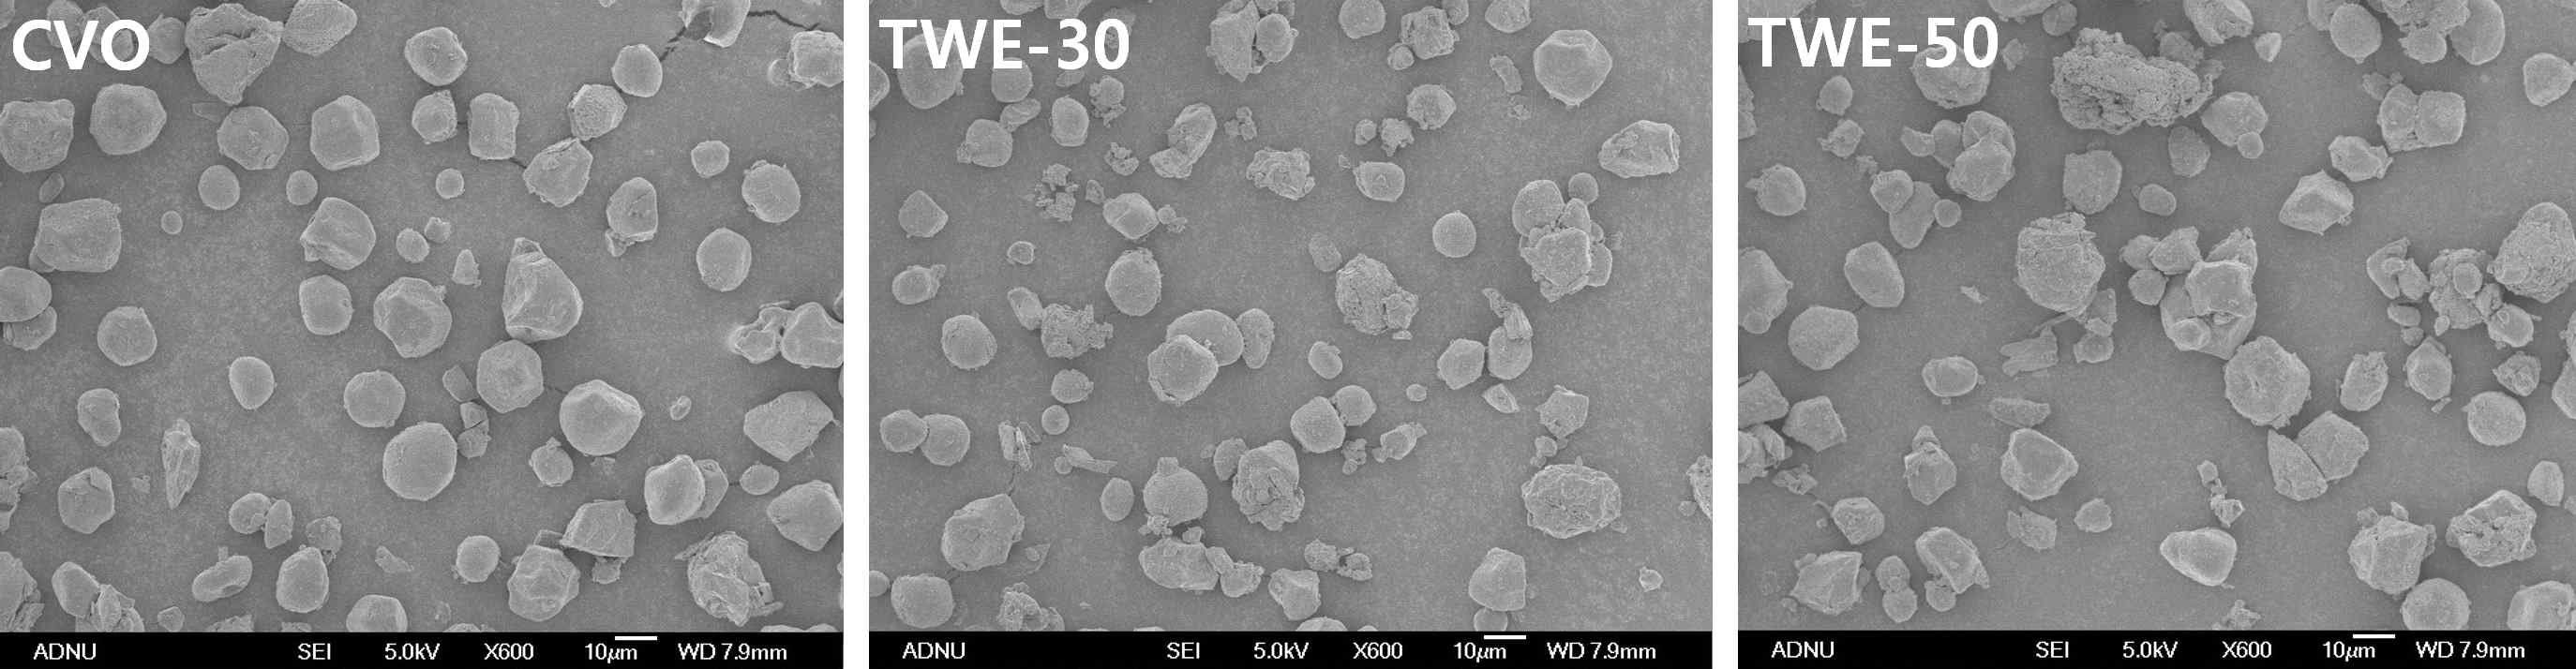 FE-SEM images of citrate starches prepared at pH 3.5 and 40% (s.b) anhydrous citric acid using a convection oven (CVO) and twin-screw extruder (TWE) (scale bar = 10μm). TWE-30 and TWE-50 treated at different screw speeds of 30 and 50 rpm, respectively, under identical REX conditions